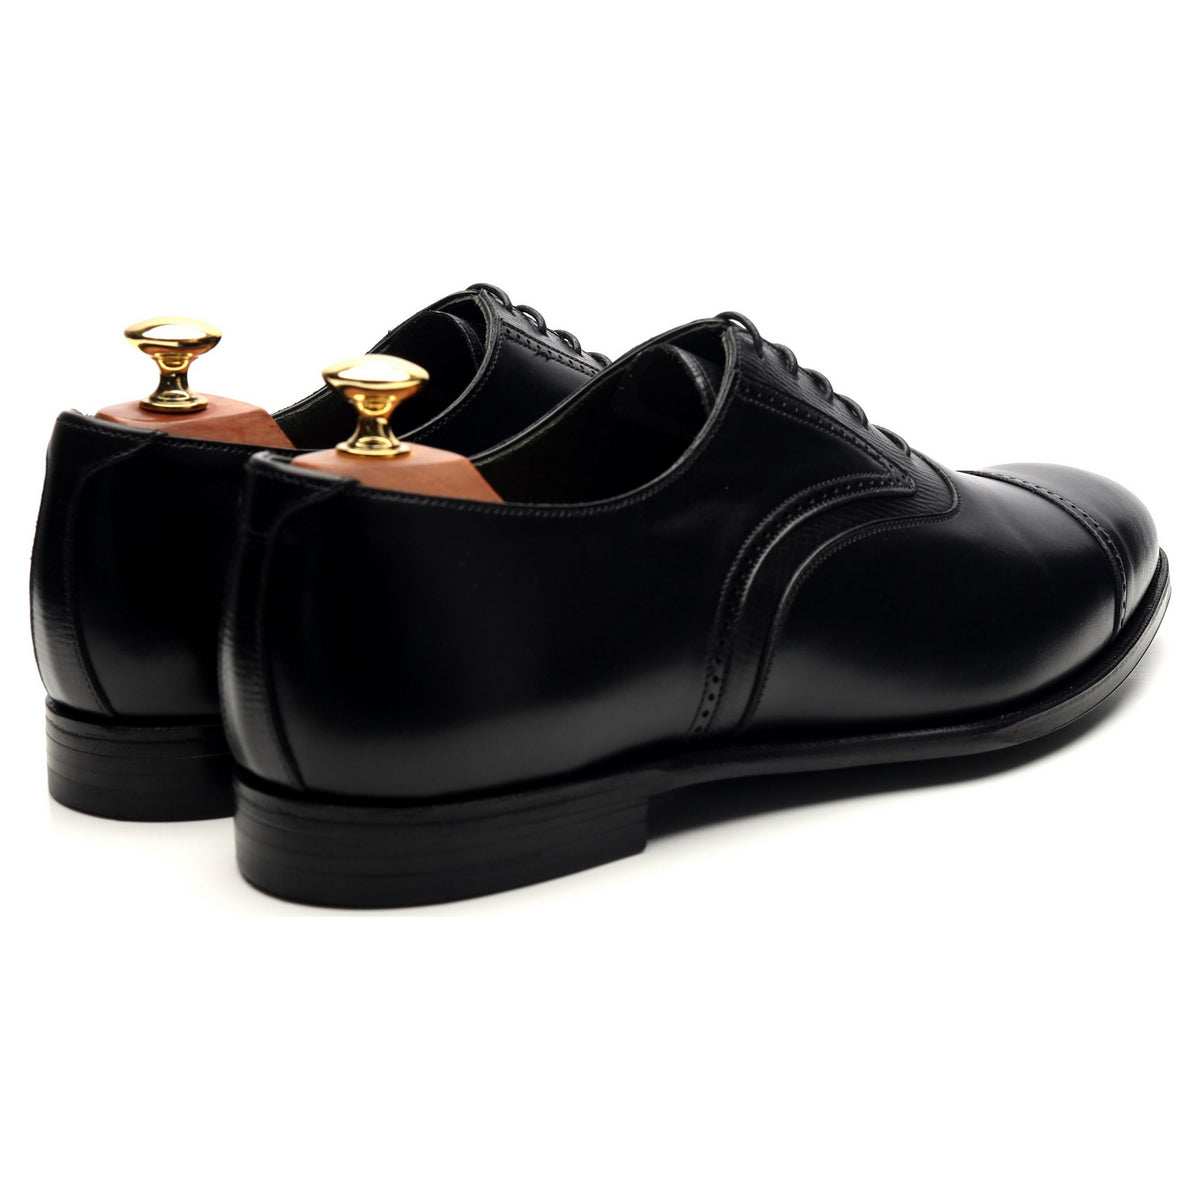 &#39;Perry&#39; Black Leather Oxford Brogues UK 9.5 E